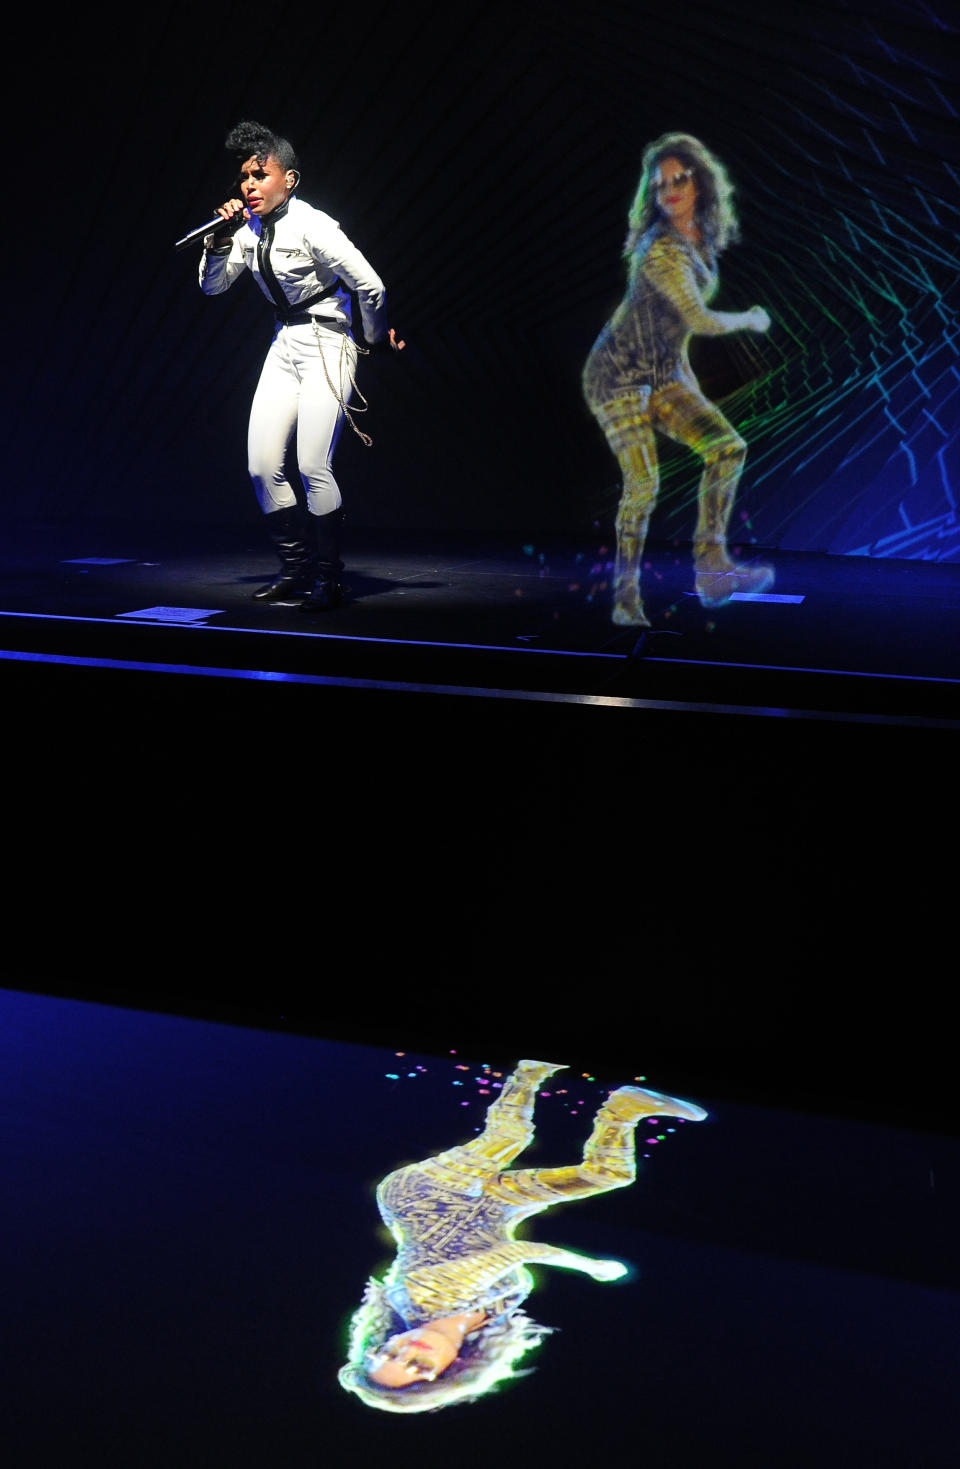 CORRECTS NAME OF EVENT FROM AUDI M3 TO AUDI A3 Janelle Monae, left, performs alongside a hologram of M.I.A. during a launch party for the Audi A3 on Thursday, April 3, 2014 in West Hollywood, Calif. (Photo by Chris Pizzello/Invision/AP)